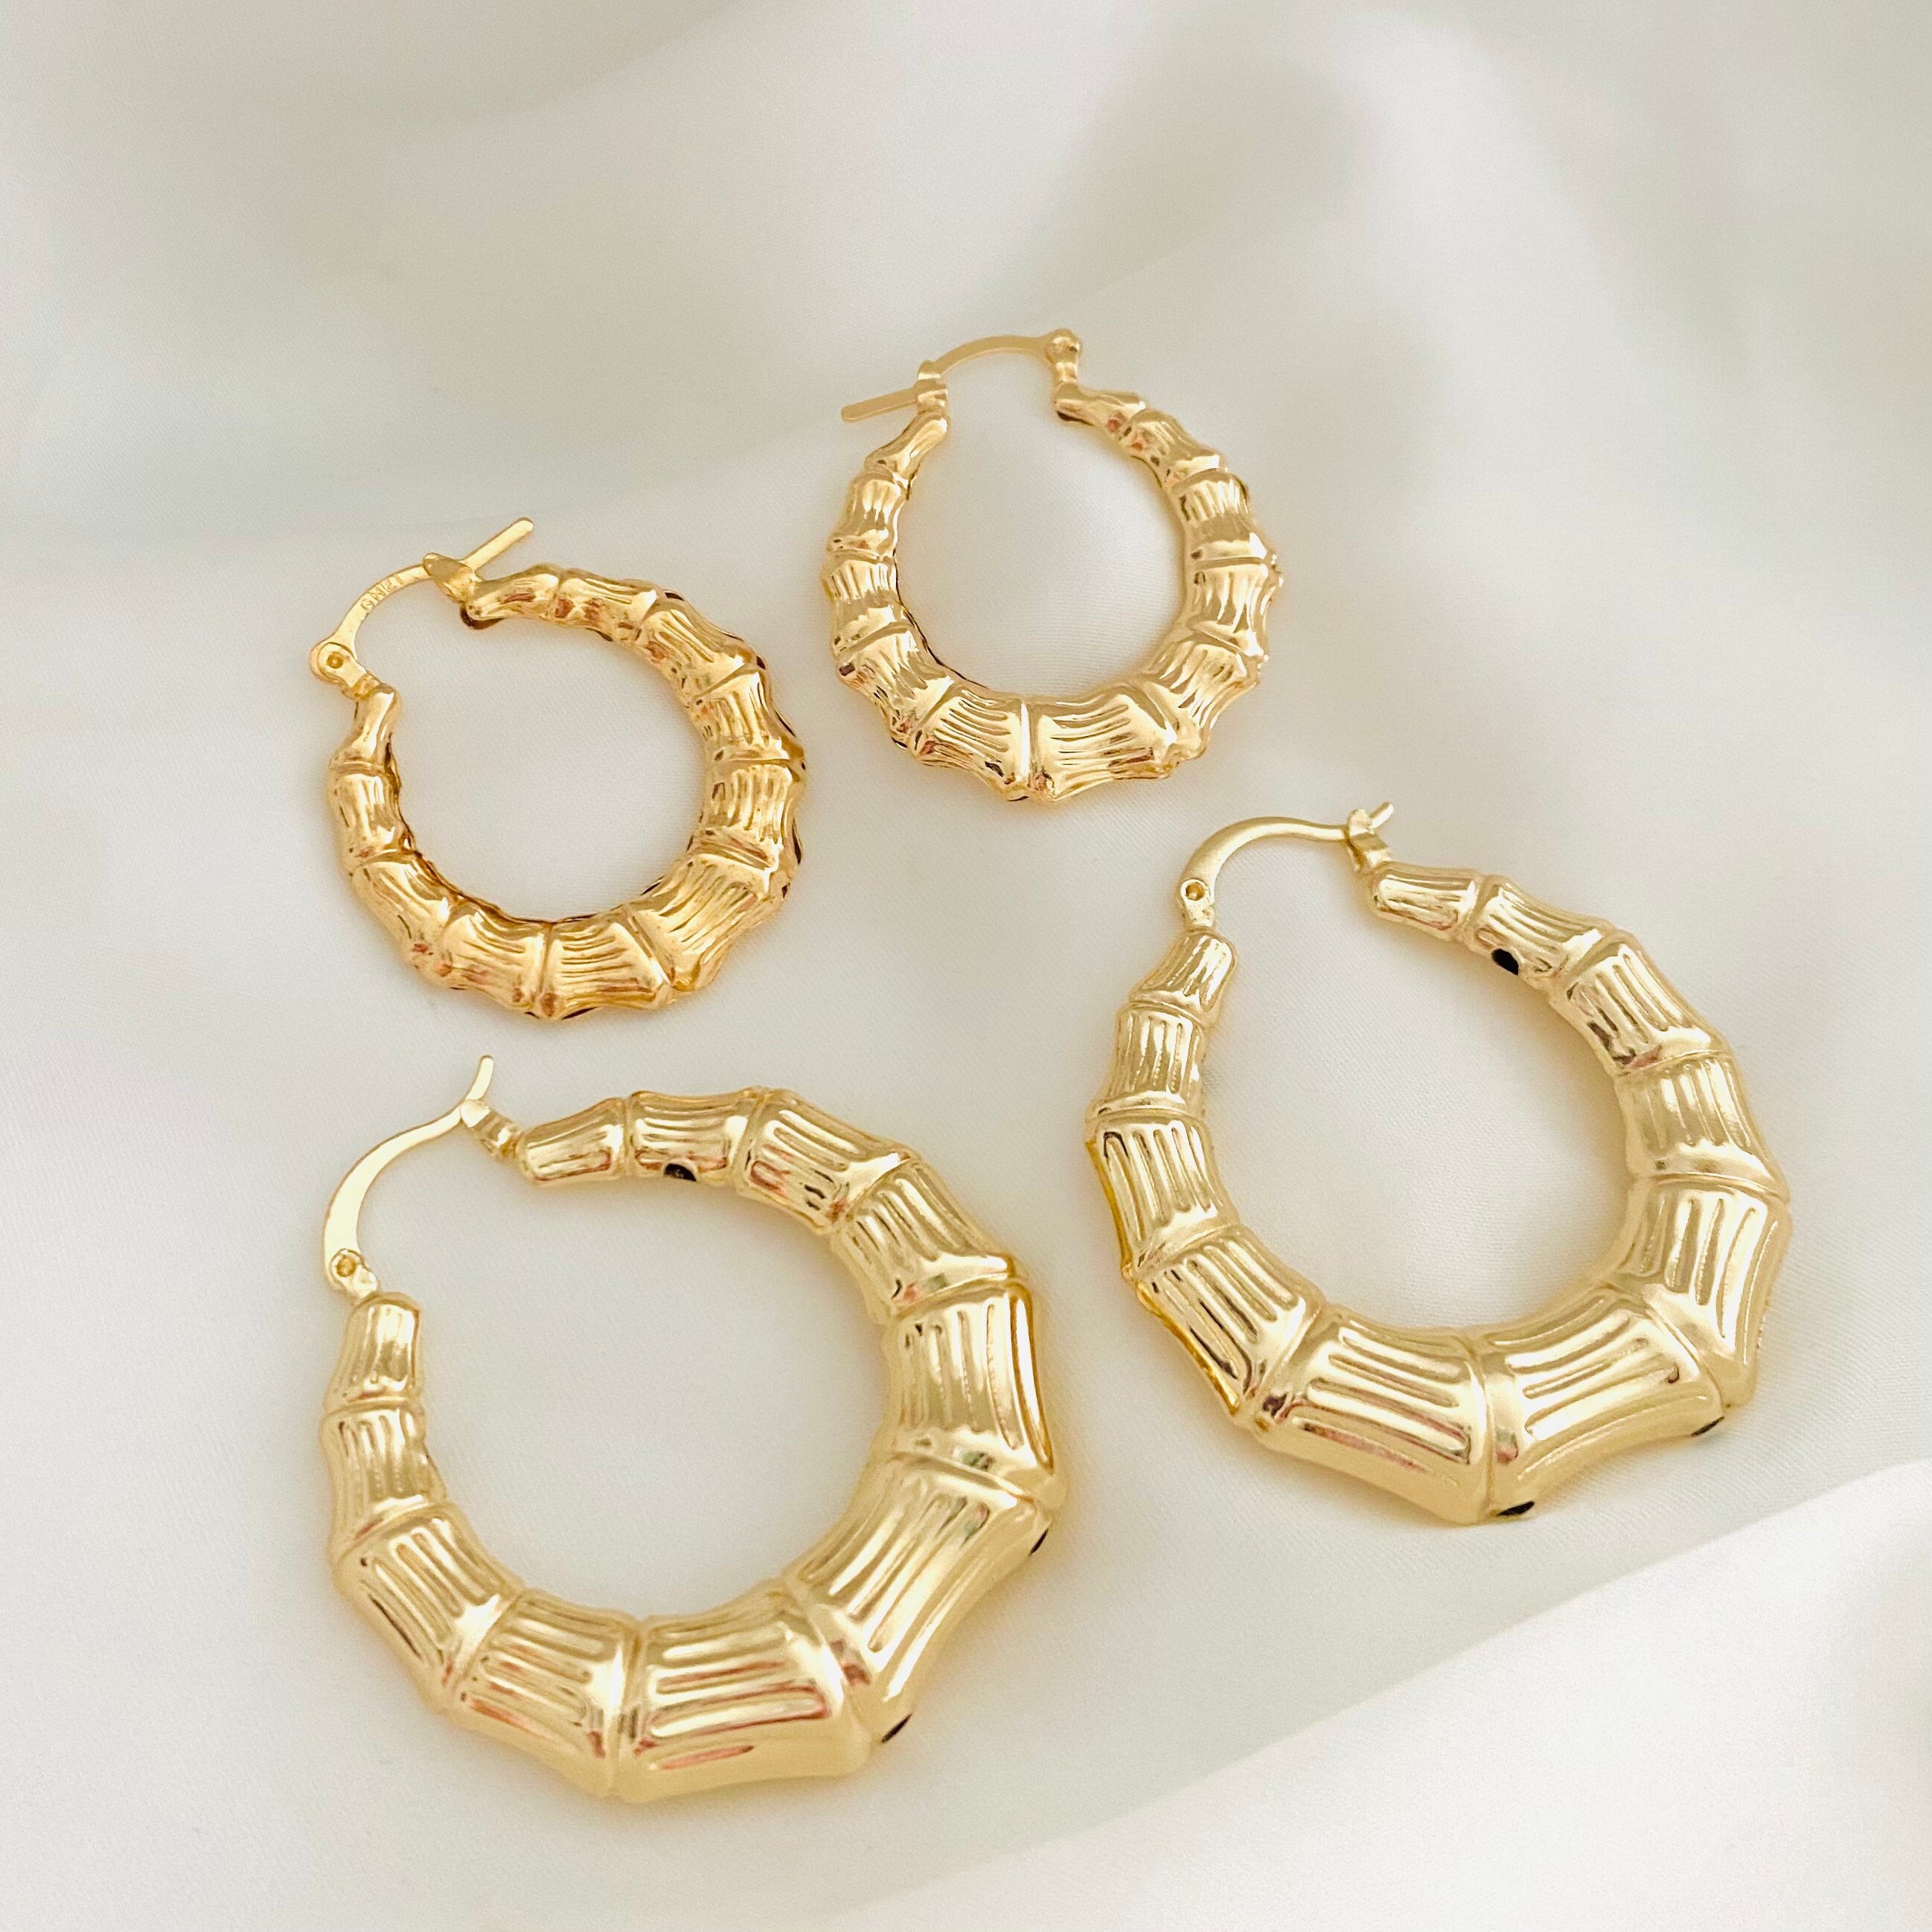 Medium Bamboo Shaped Earrings, Large Gold Hoops, Hammered Gold Hoops, Hoop  Earrings,bamboo Hoops, Chunky Gold Bamboo Hoops,thick Hoops -  Denmark